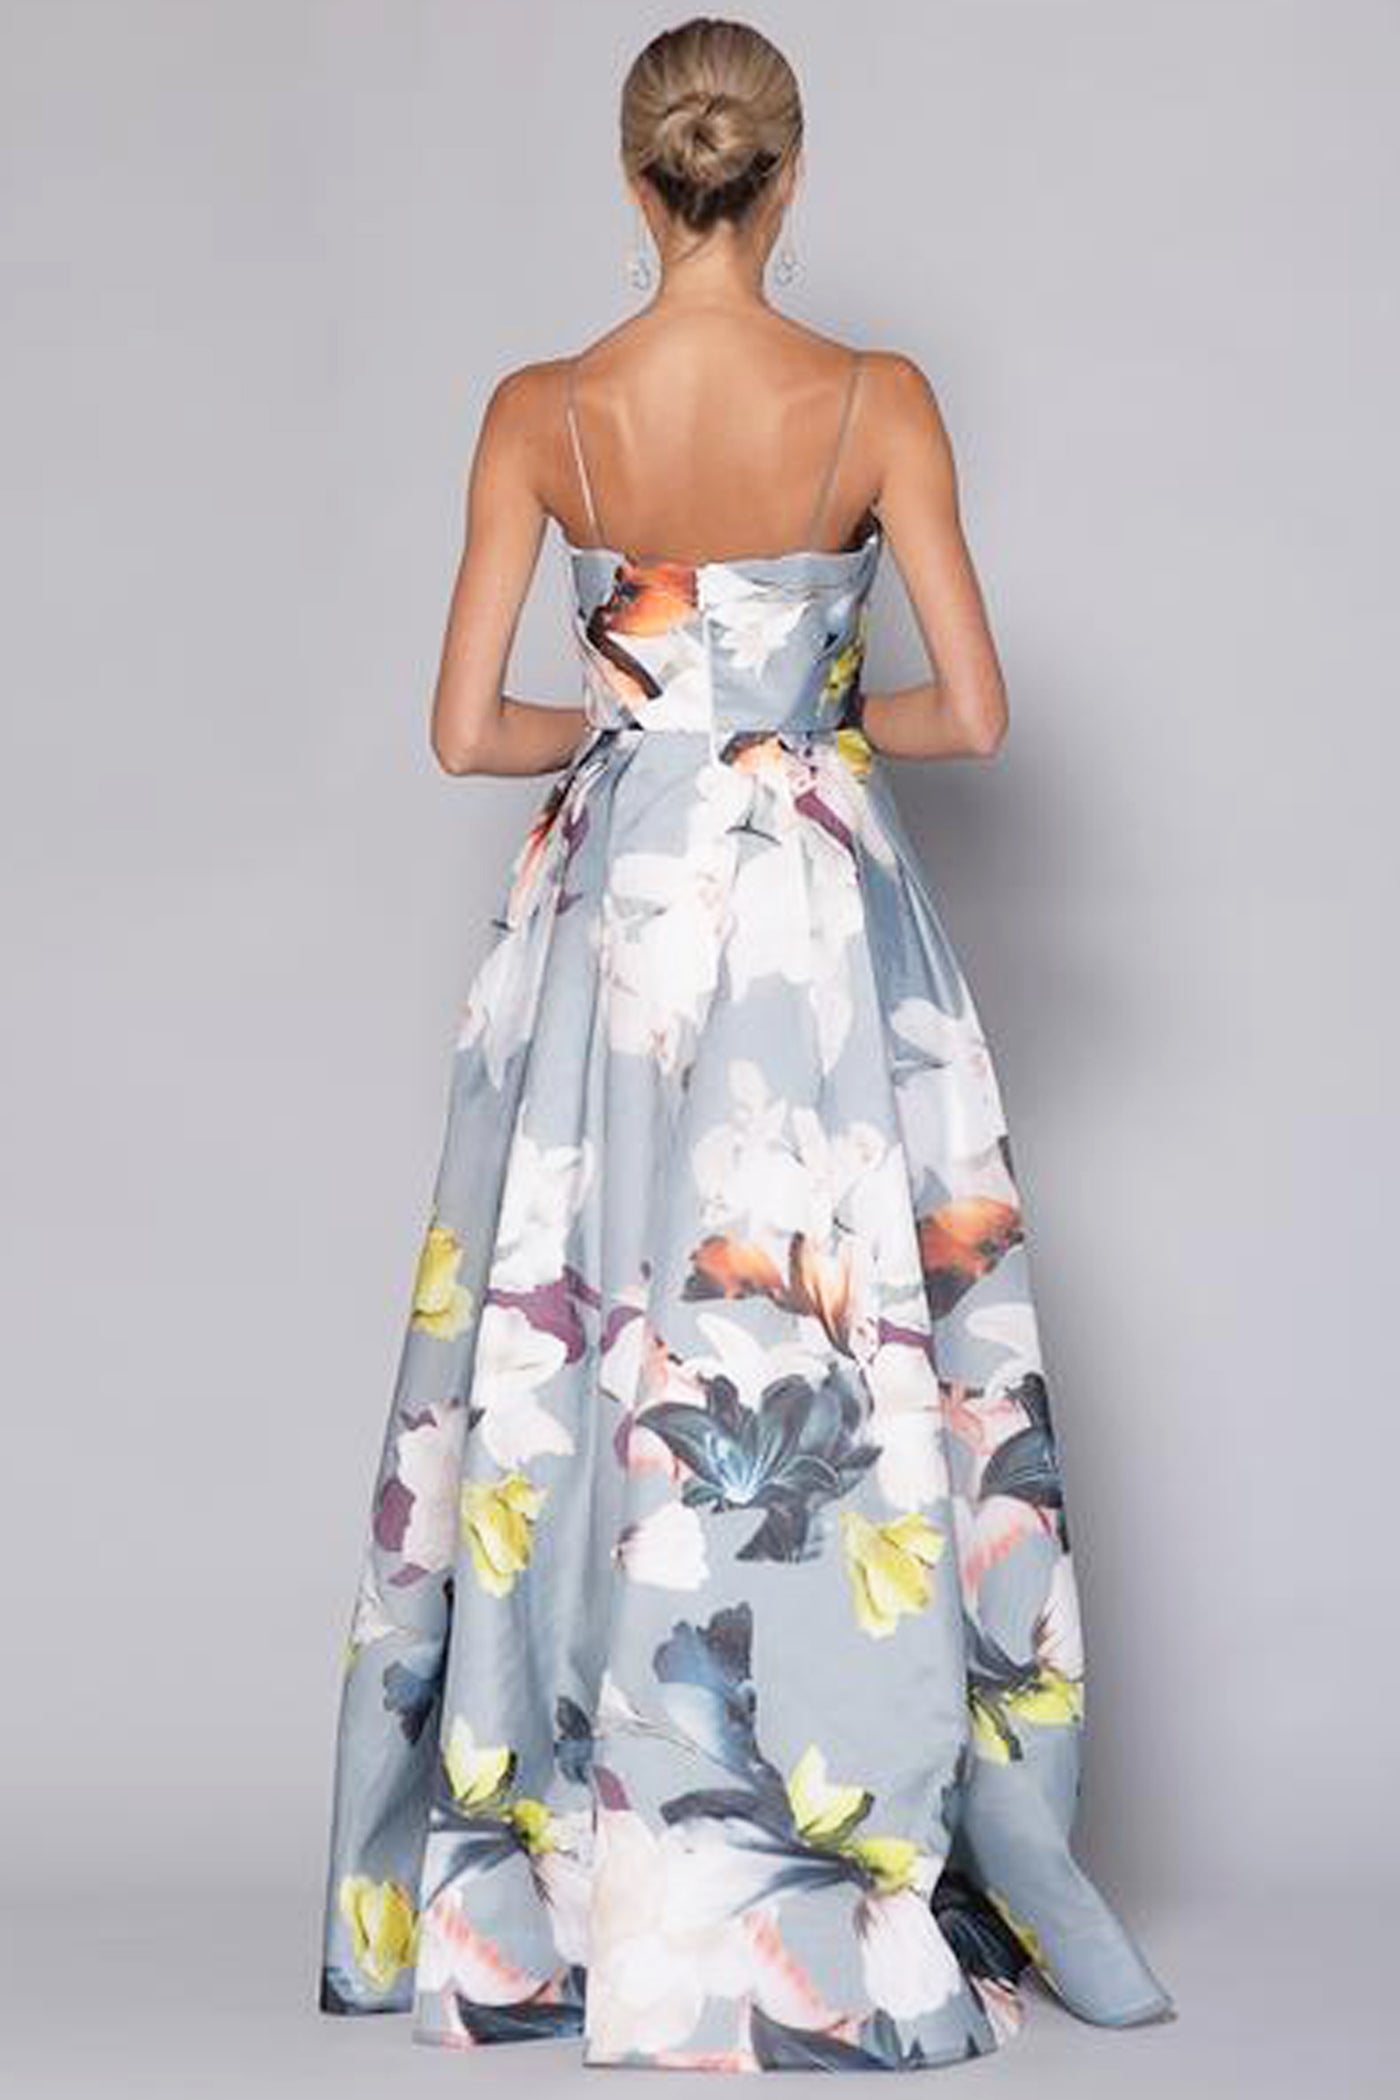 Floral print ballgown rental by Bariano at The Fitzroy